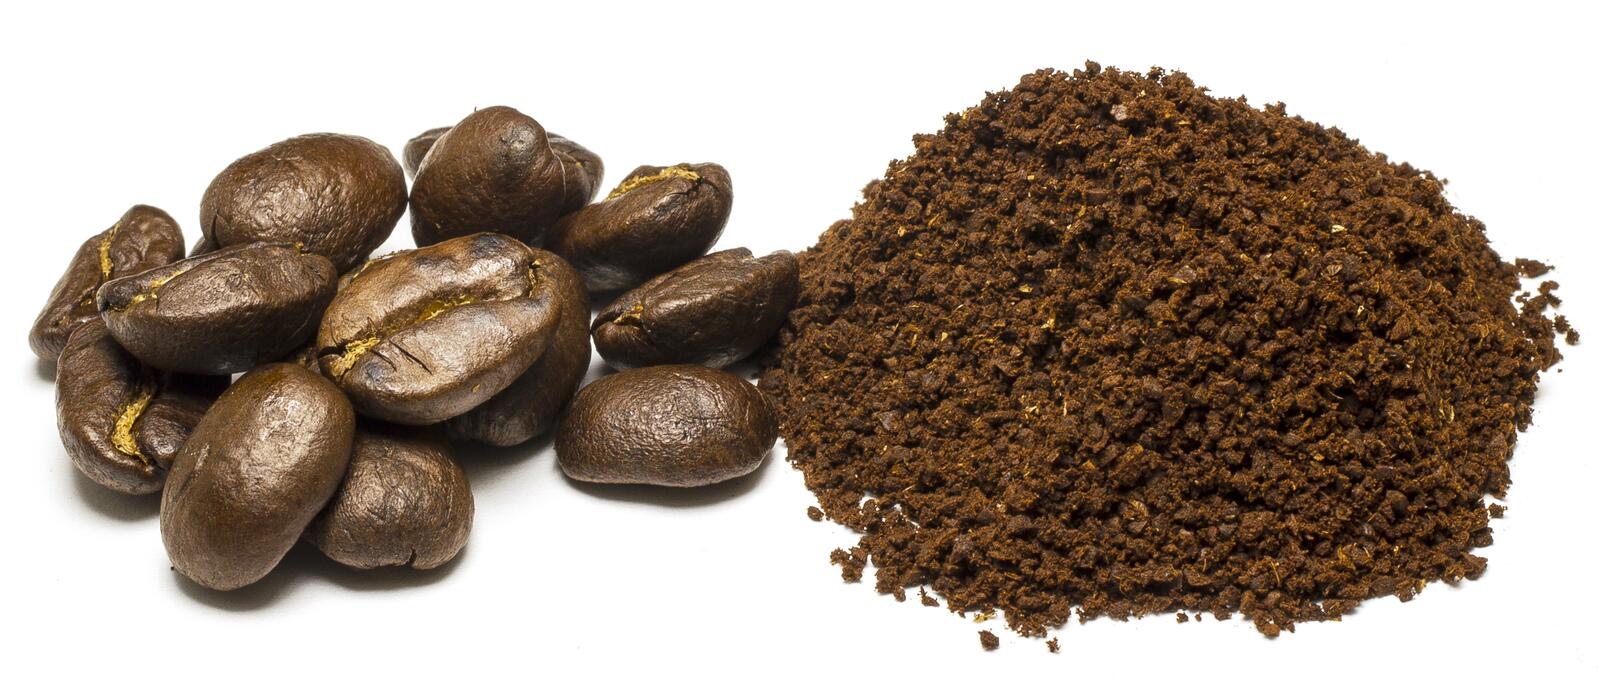 Free photo Coffee beans with a pile of coffee dust on a white background